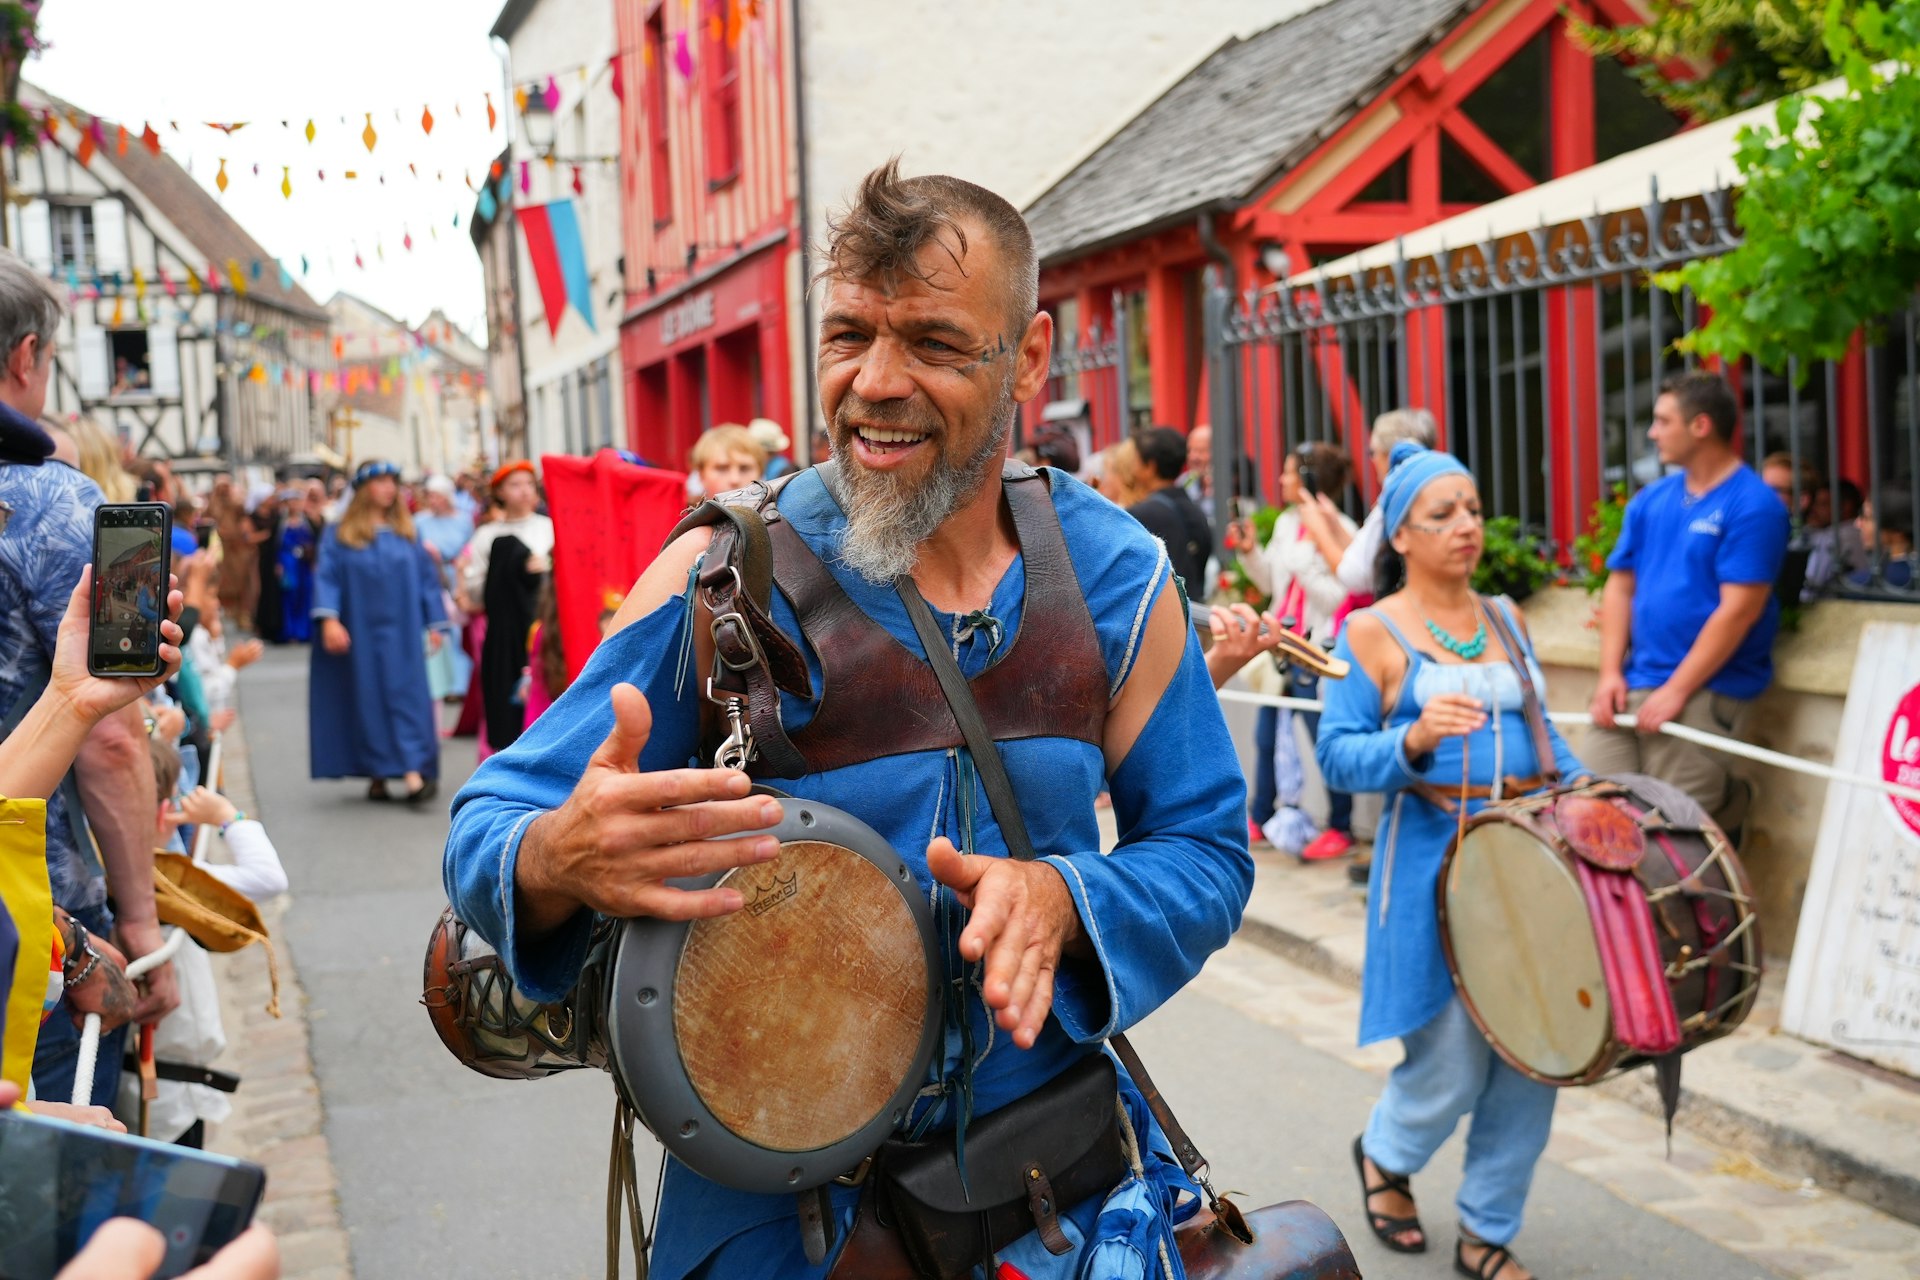 Group of musicians playing djembe in the streets at the “Médiévales de Provins” medieval fair, Provins, Île-de-France, France